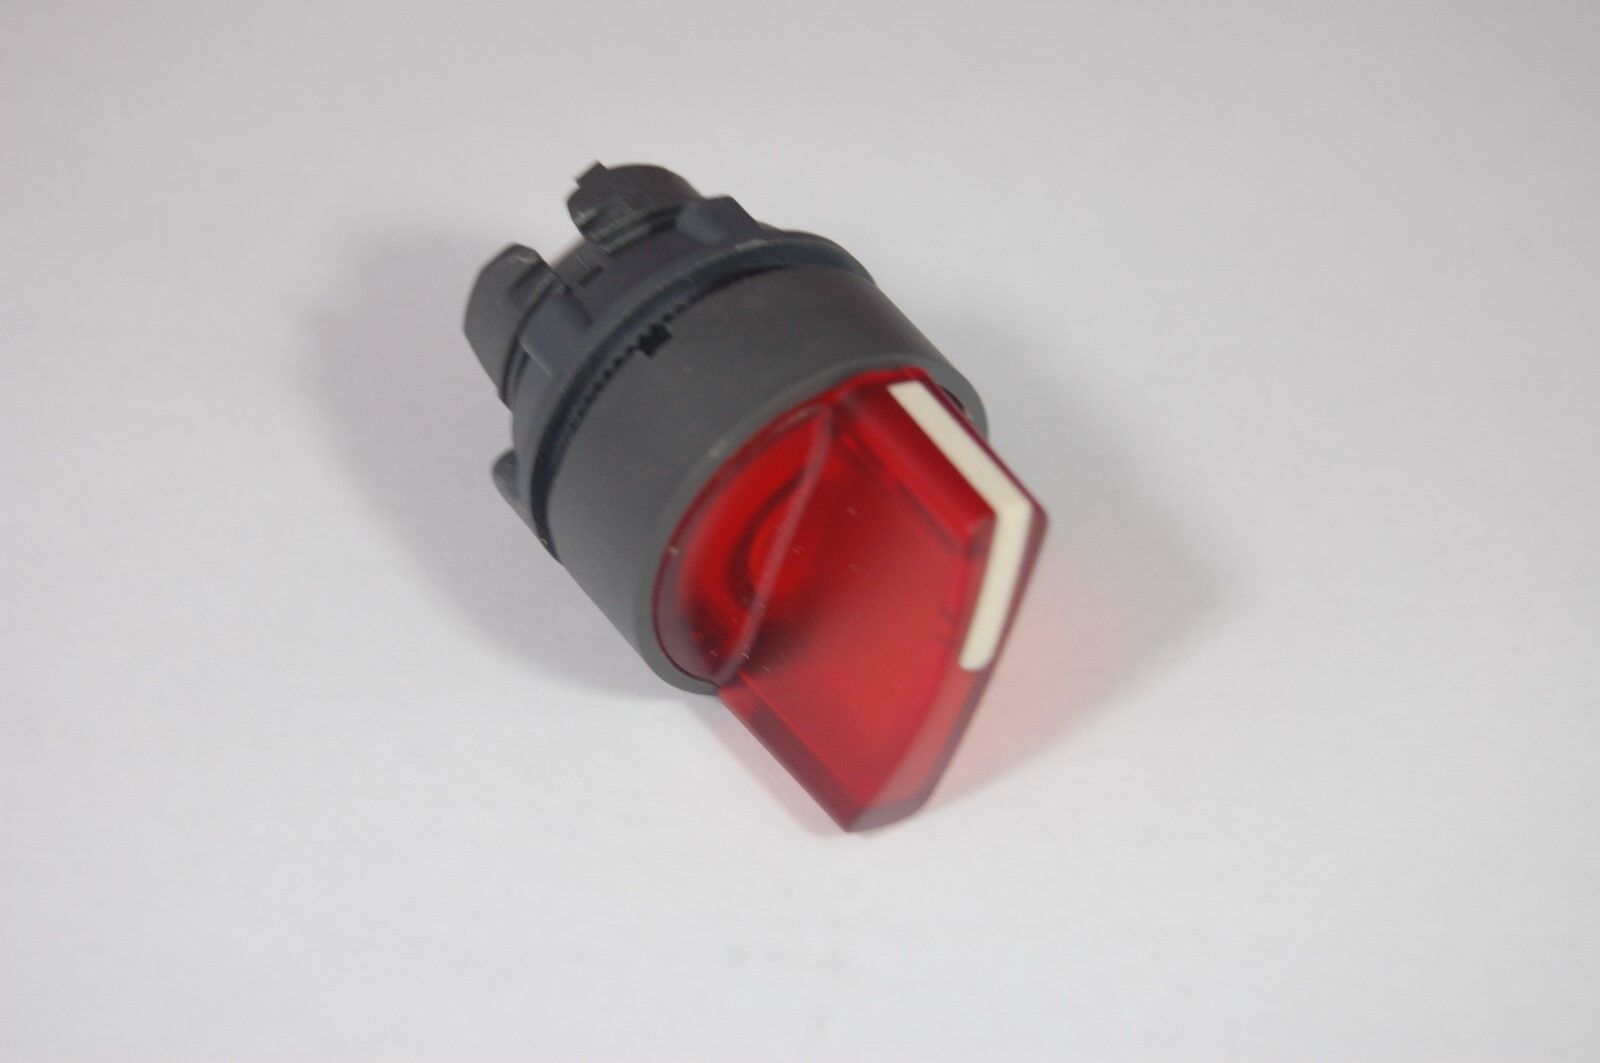 1PC 22MM Select SWITCH  HEAD 3 Positon FITS ZB5AK1543 RED Momentary